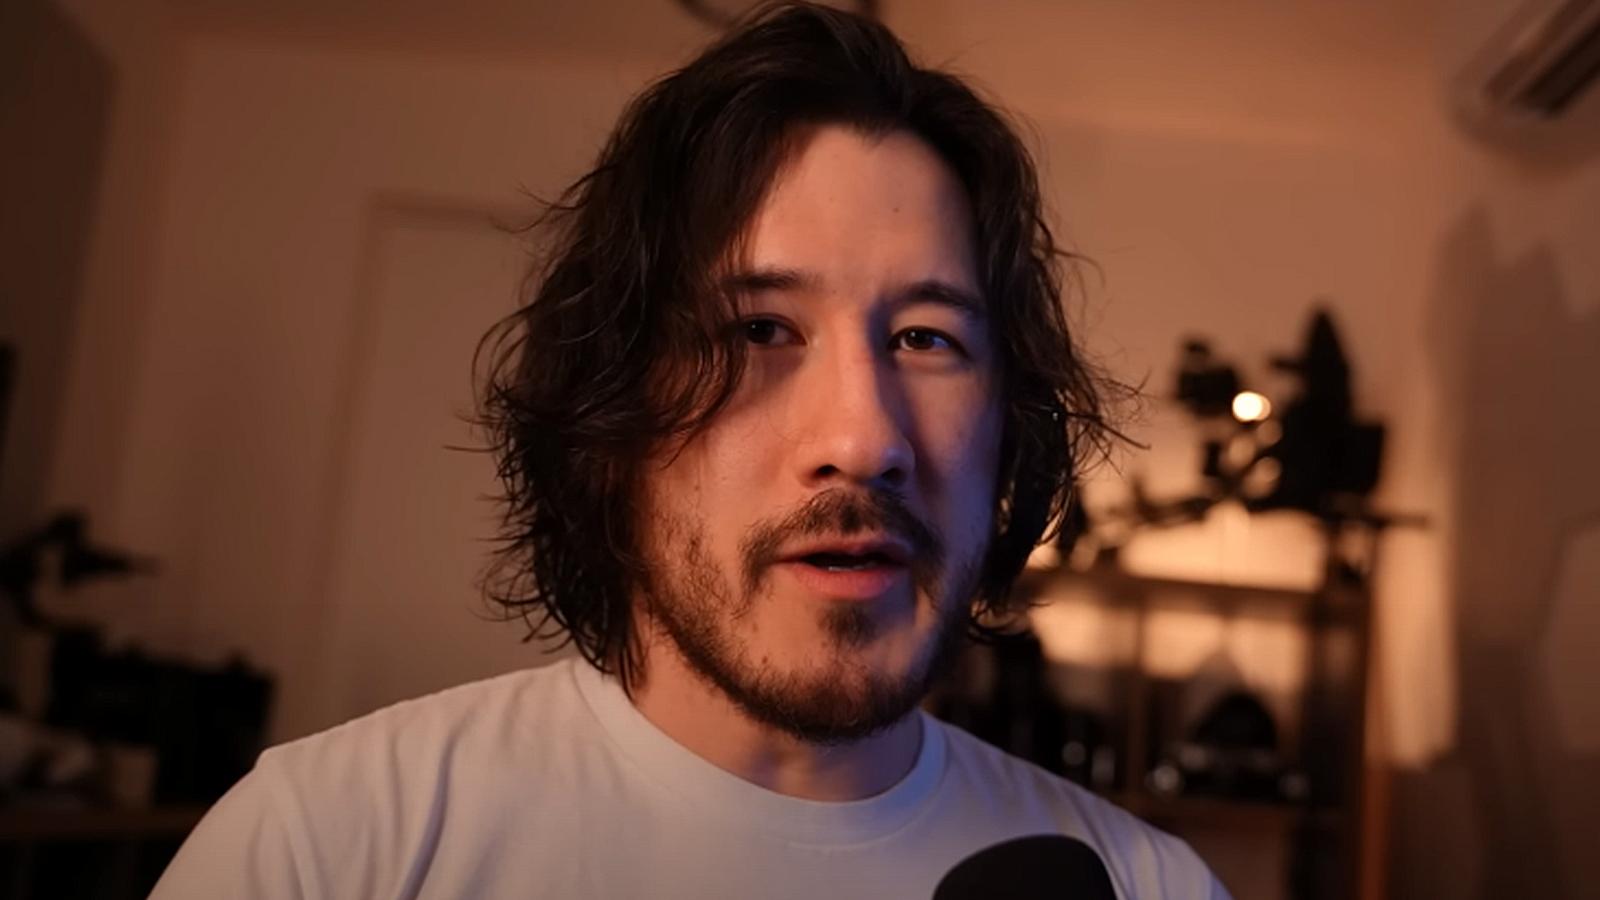 markiplier-iron-lung-movie-update-close-to-done